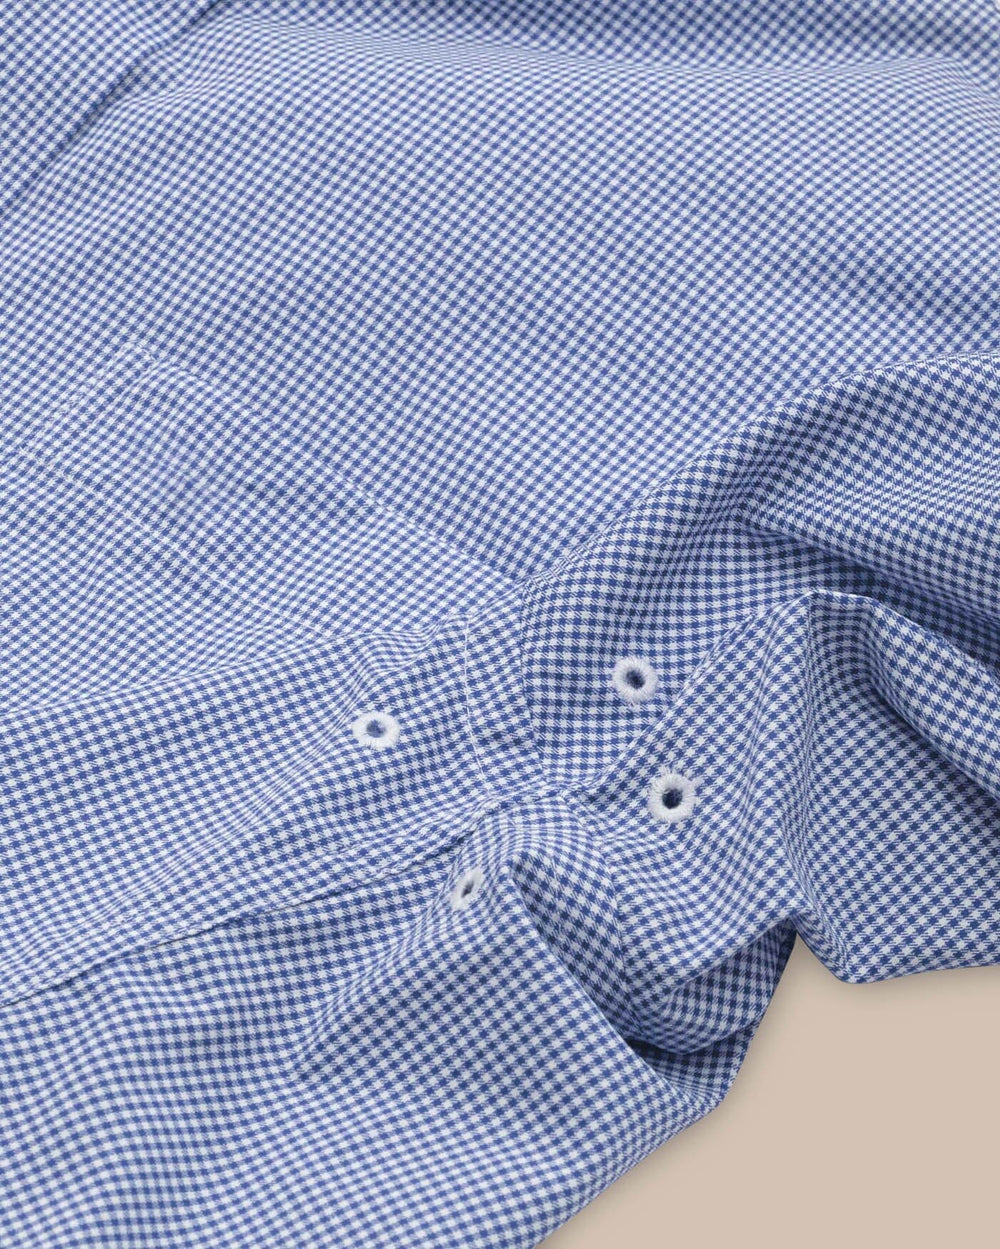 The detail view of the Southern Tide Team Colors Gingham Intercoastal Sport Shirt by Southern Tide - University Blue